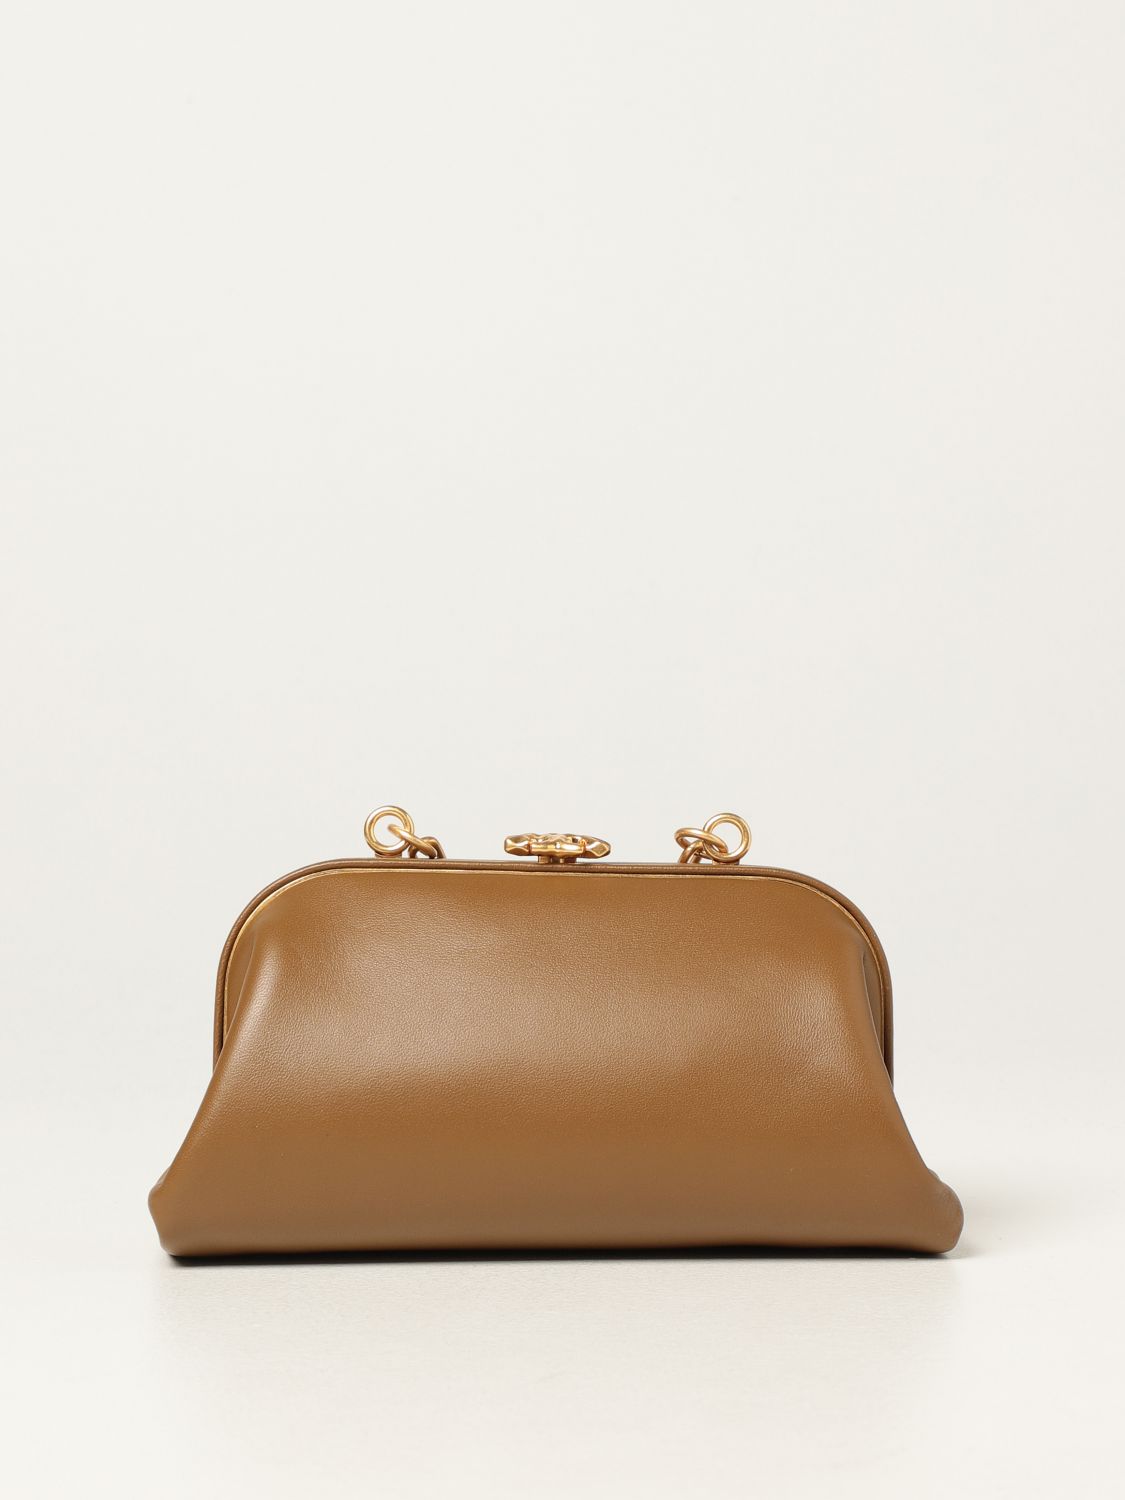 TORY BURCH: Cleo pouch in nappa leather - Camel | Tory Burch mini bag 83112  online on 